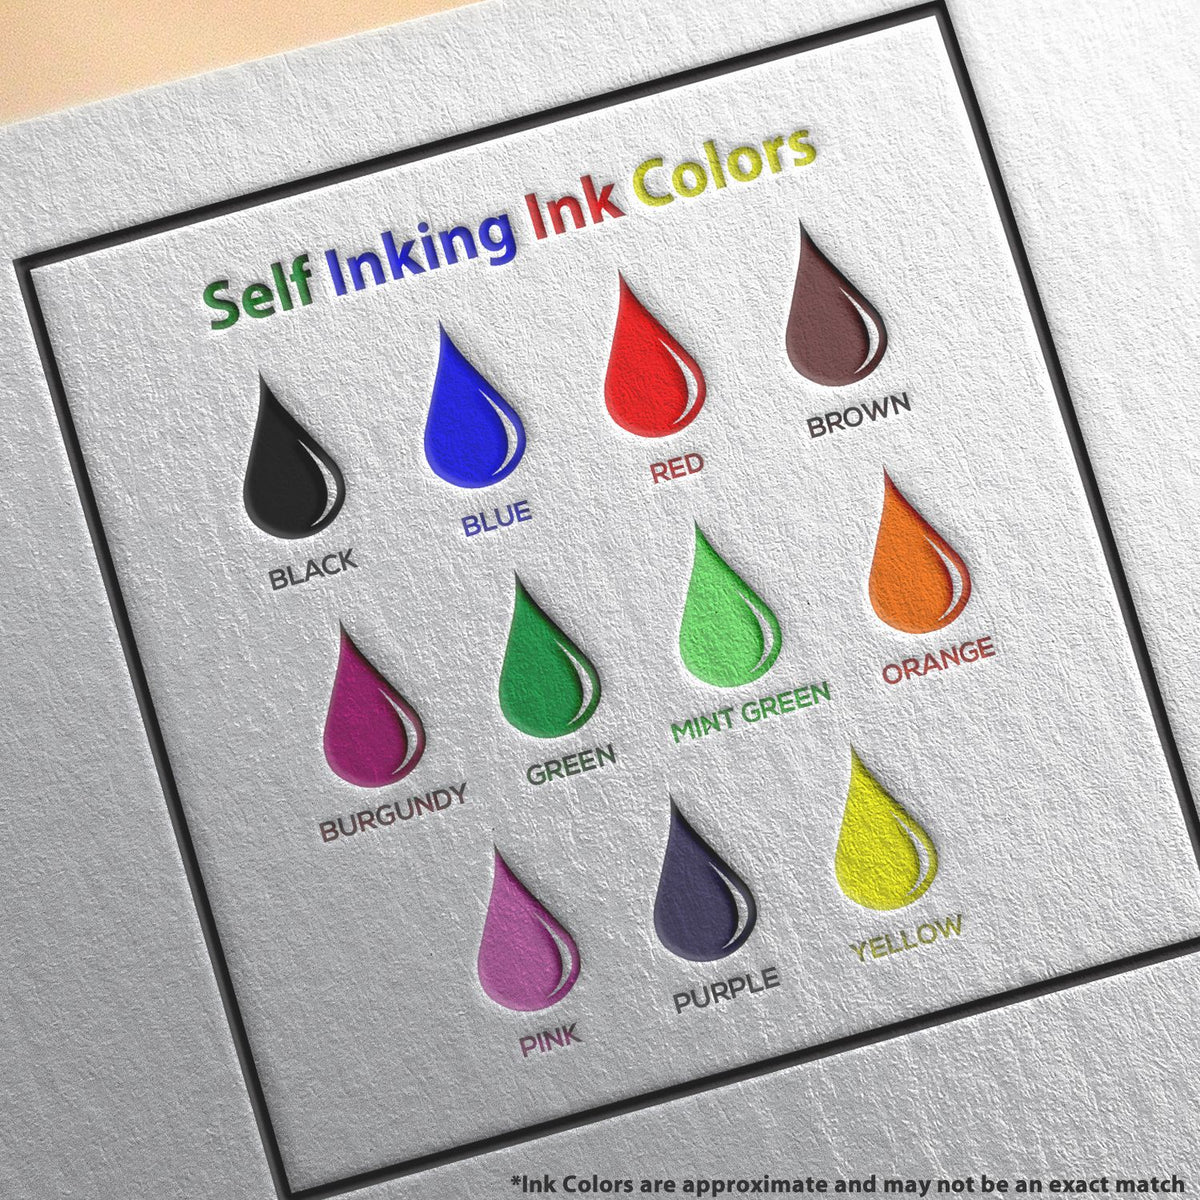 A picture showing the different ink colors or hues available for the Self-Inking Illinois PE Stamp product.